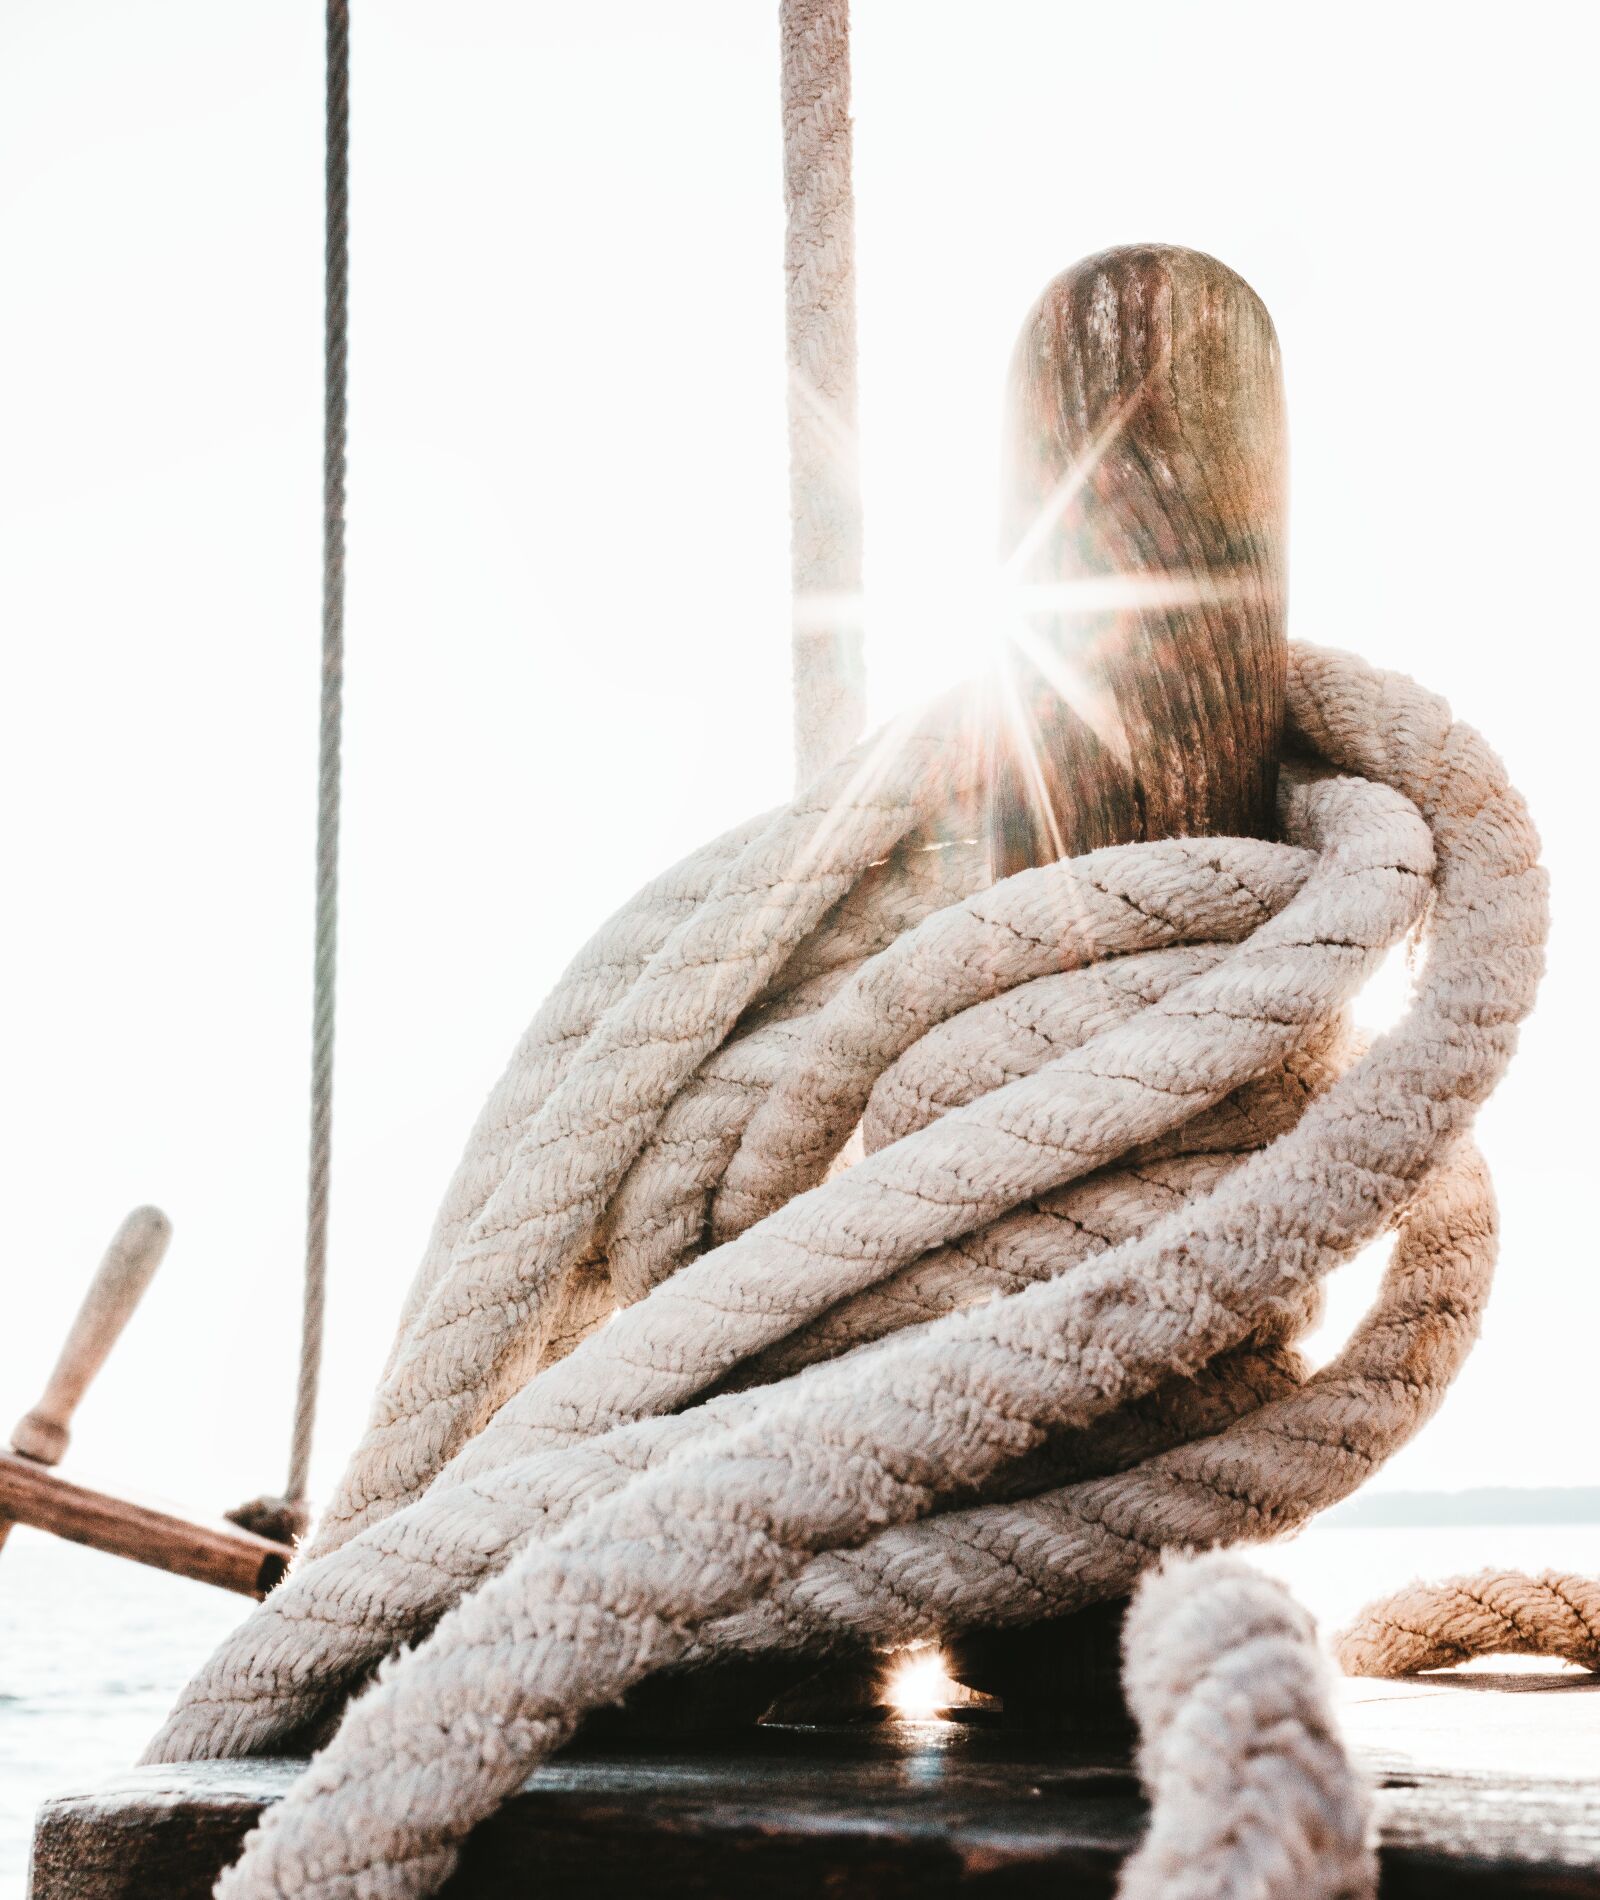 Sony a6300 sample photo. Sailing vessel, ropes, ship photography